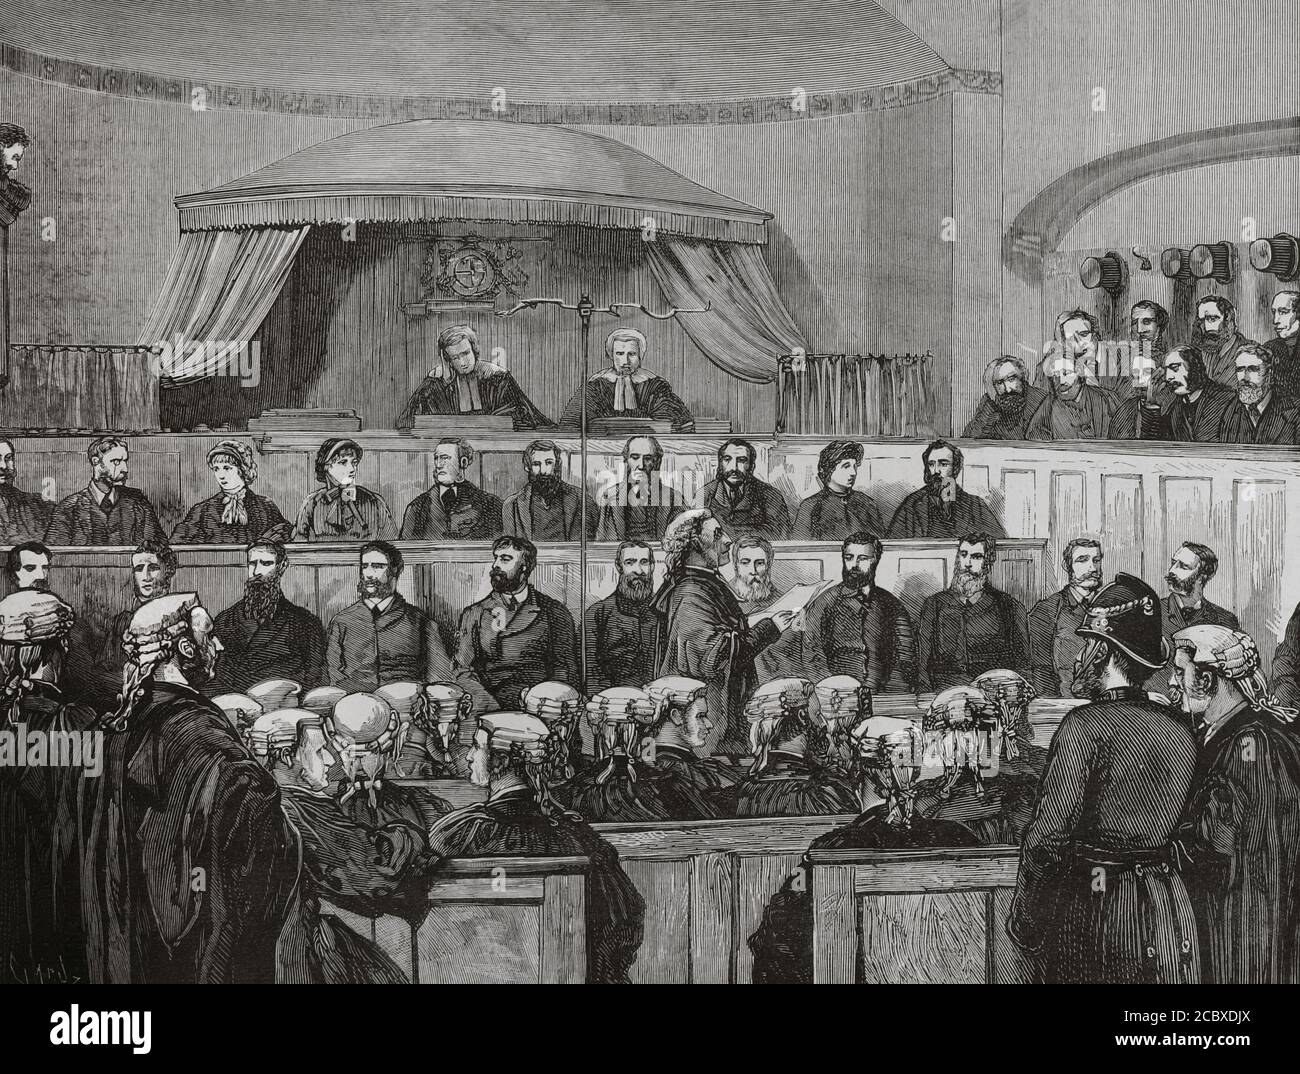 Ireland, Dublin. Proceedings against the heads of the 'Irish Land League' (1879-1882), organisation formed during the agrarian depression to demand tenant rights and the reform of country's landlord system under British rule, founded in October 1879 by Michael Davitt. First hearing in court. The 'attorney' reading the indictment. Presiding over the court, judges Mr. Fitzgerald (president) and Mr. Barry. The defendants in the second row of seats. On the right, the jury. Engraving. La Ilustracion Española y Americana, 1881. Stock Photo